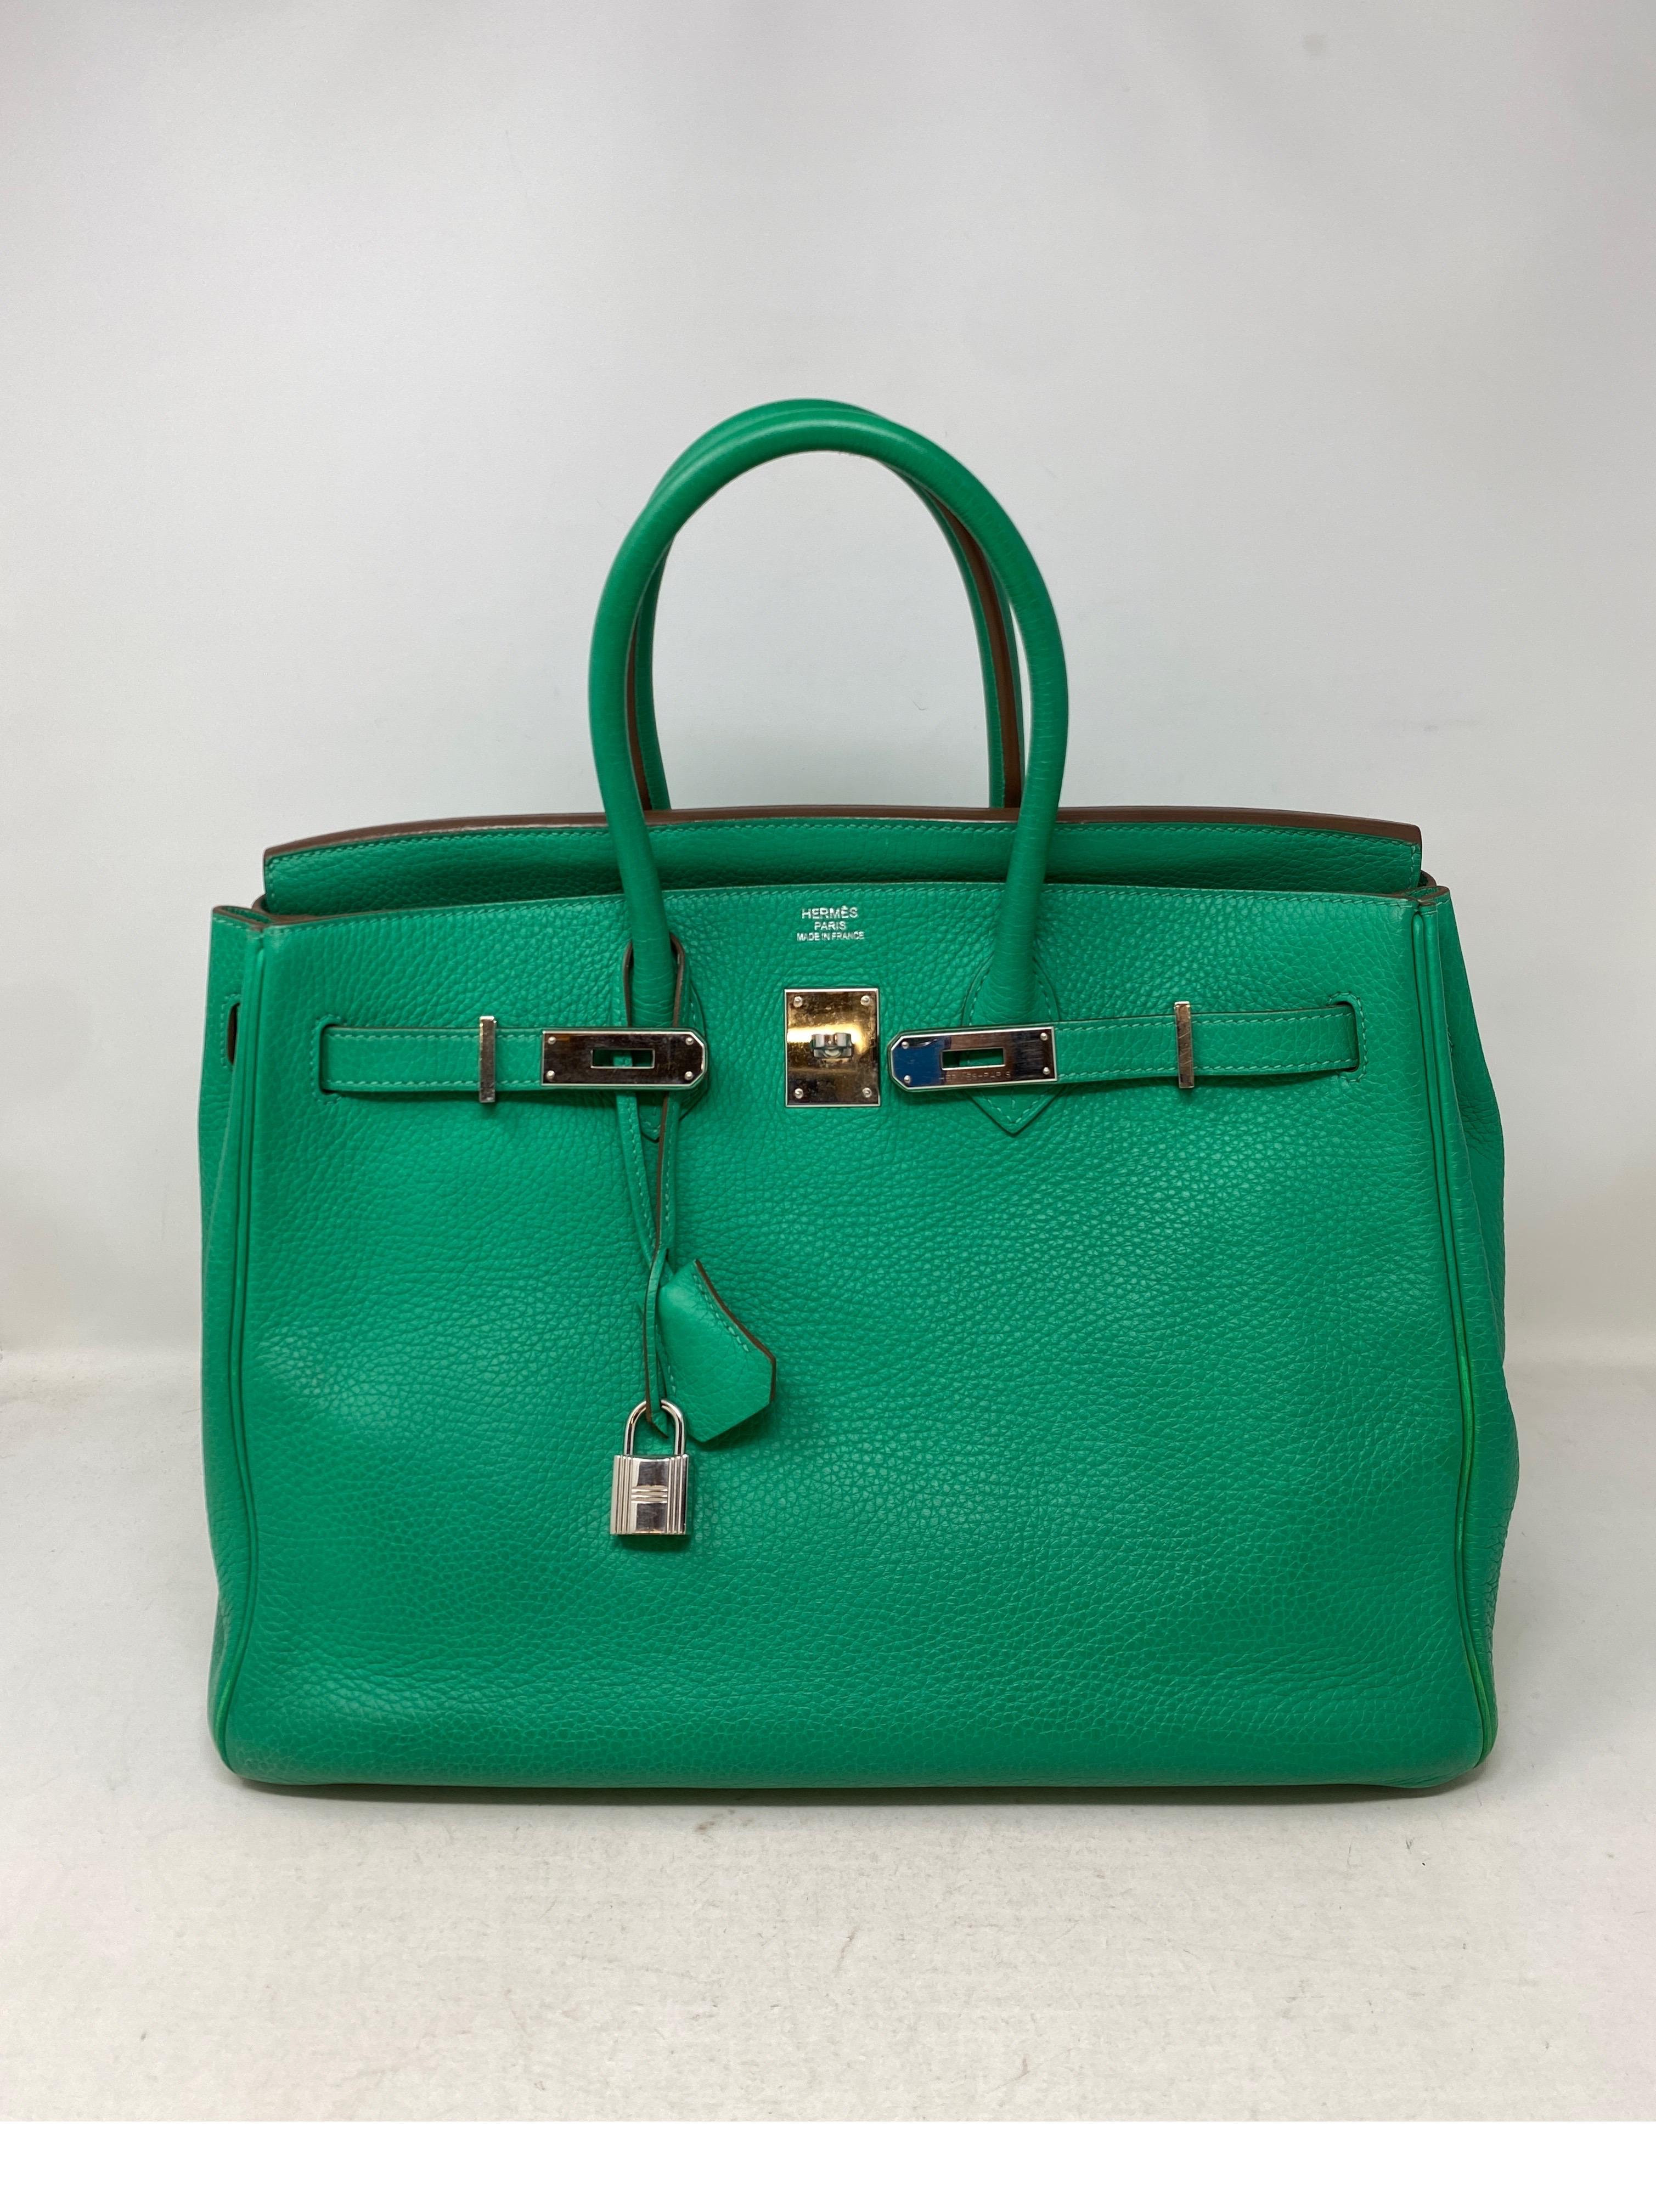 Hermes Menthe 35 Birkin Bag. Beautiful mint green color bag. Palladium silver hardware. Good condition. Interior clean. Exterior good condition. Unique minty green color. Clemence leather. Includes clochette, lock, keys, and dust bag. Guaranteed